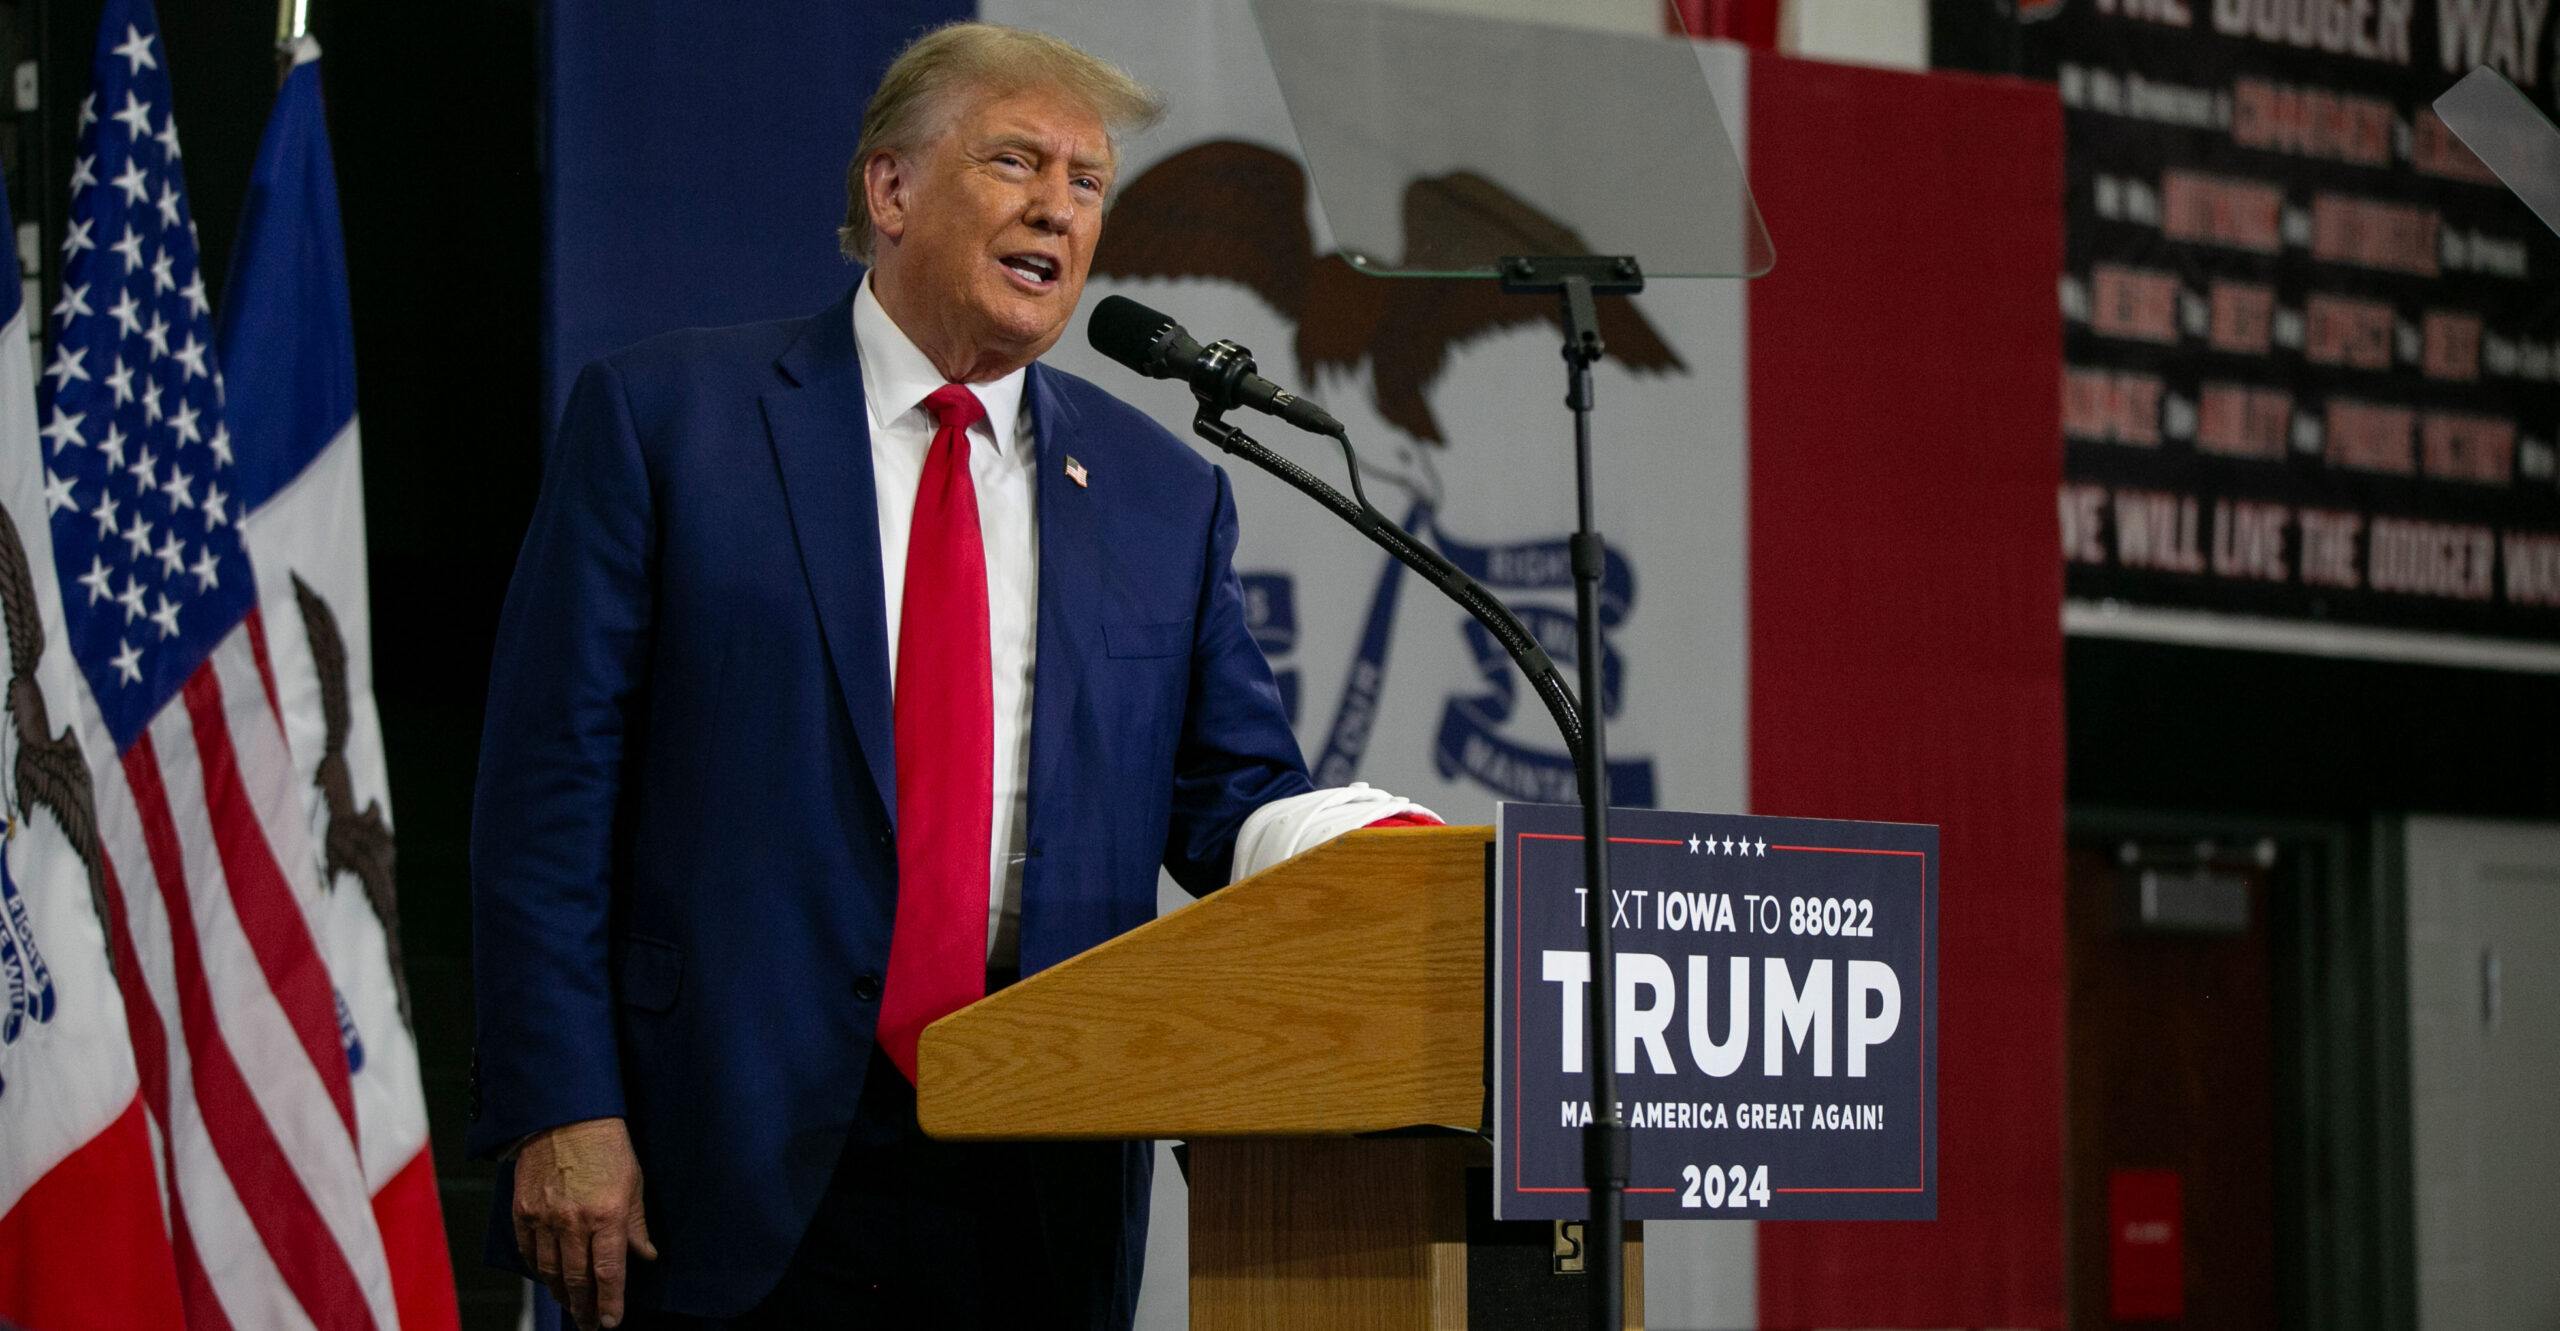 ICYMI: 'Outrageous Attempt at Disenfranchising': 6 Takeaways From Trump's Iowa Rally